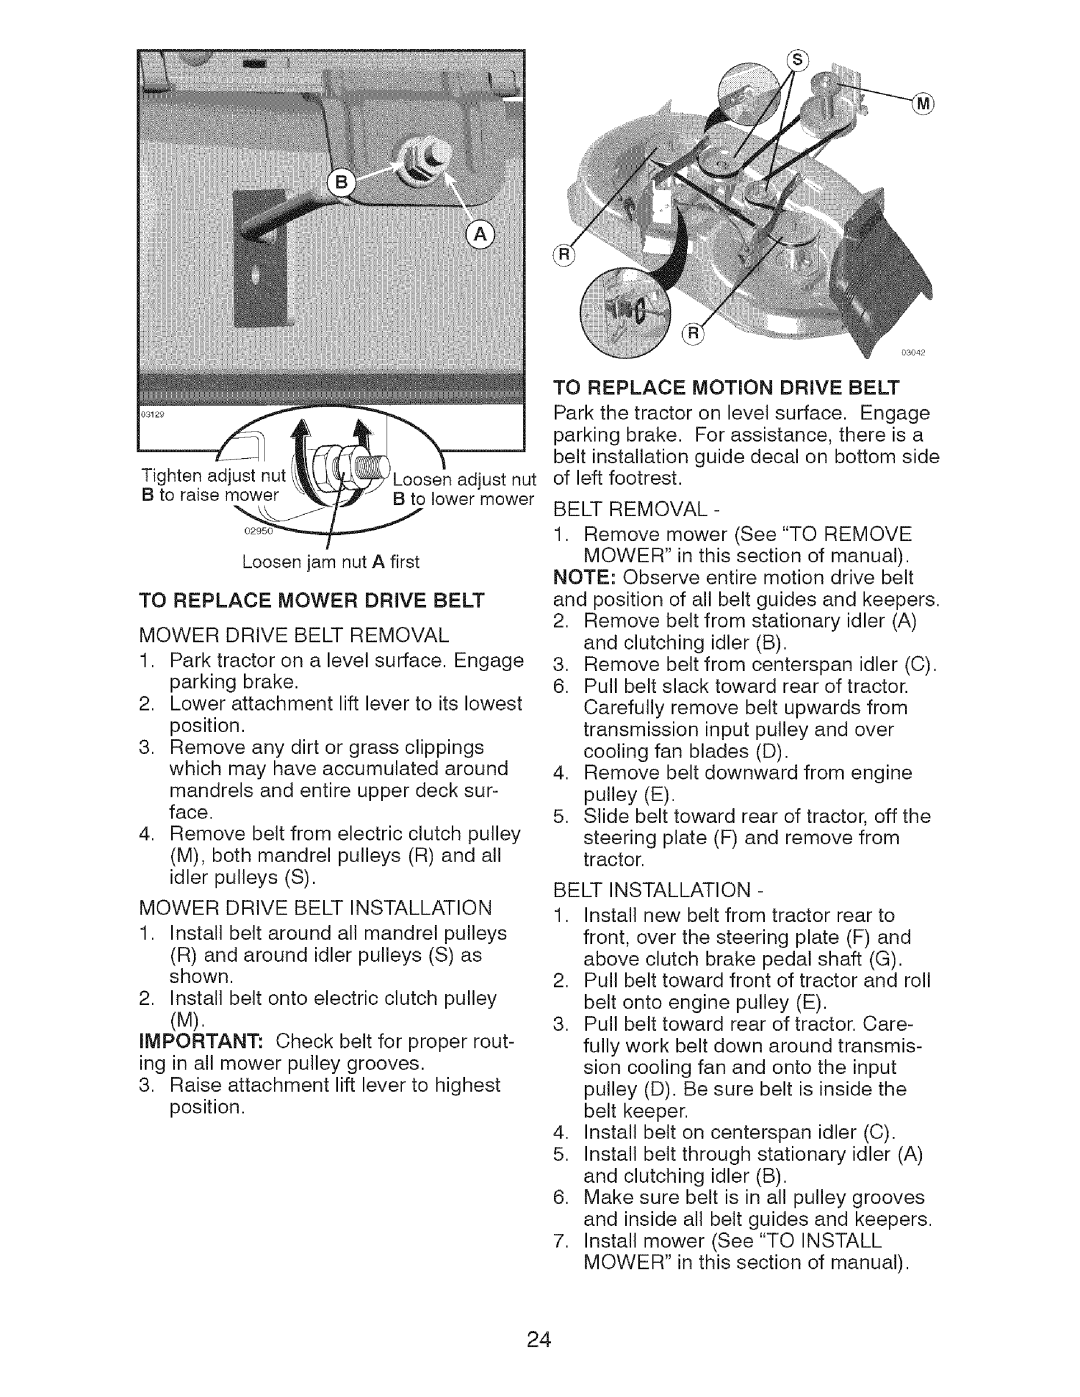 Craftsman 917.28726 owner manual To Replace Mower Drive Belt 